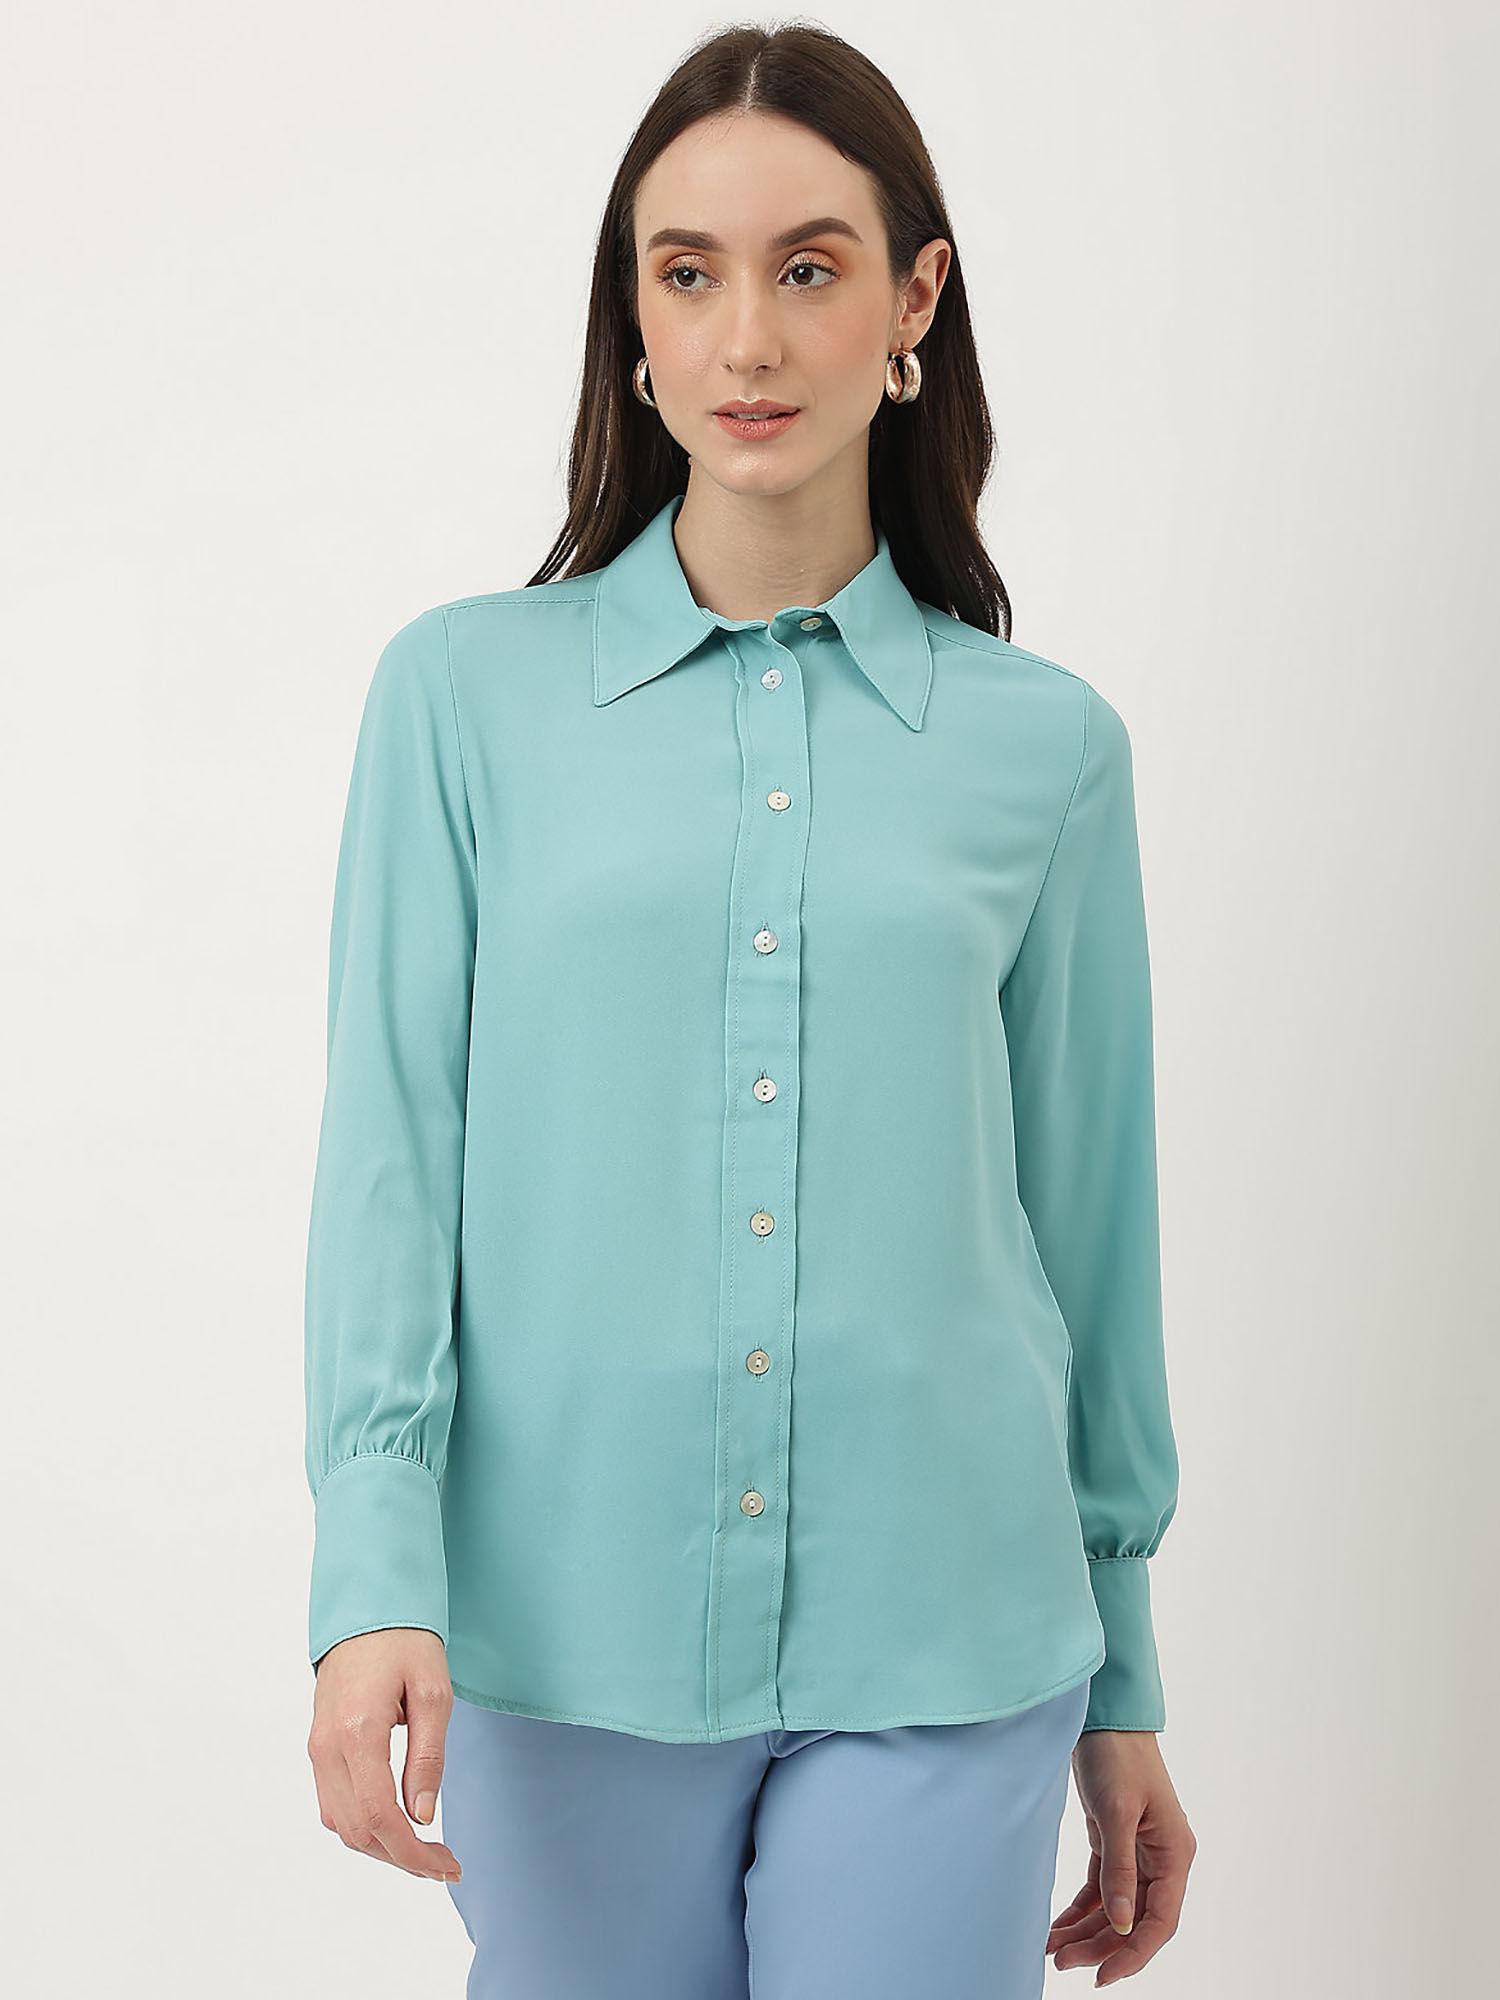 blue pure poly plain collared neck shirt